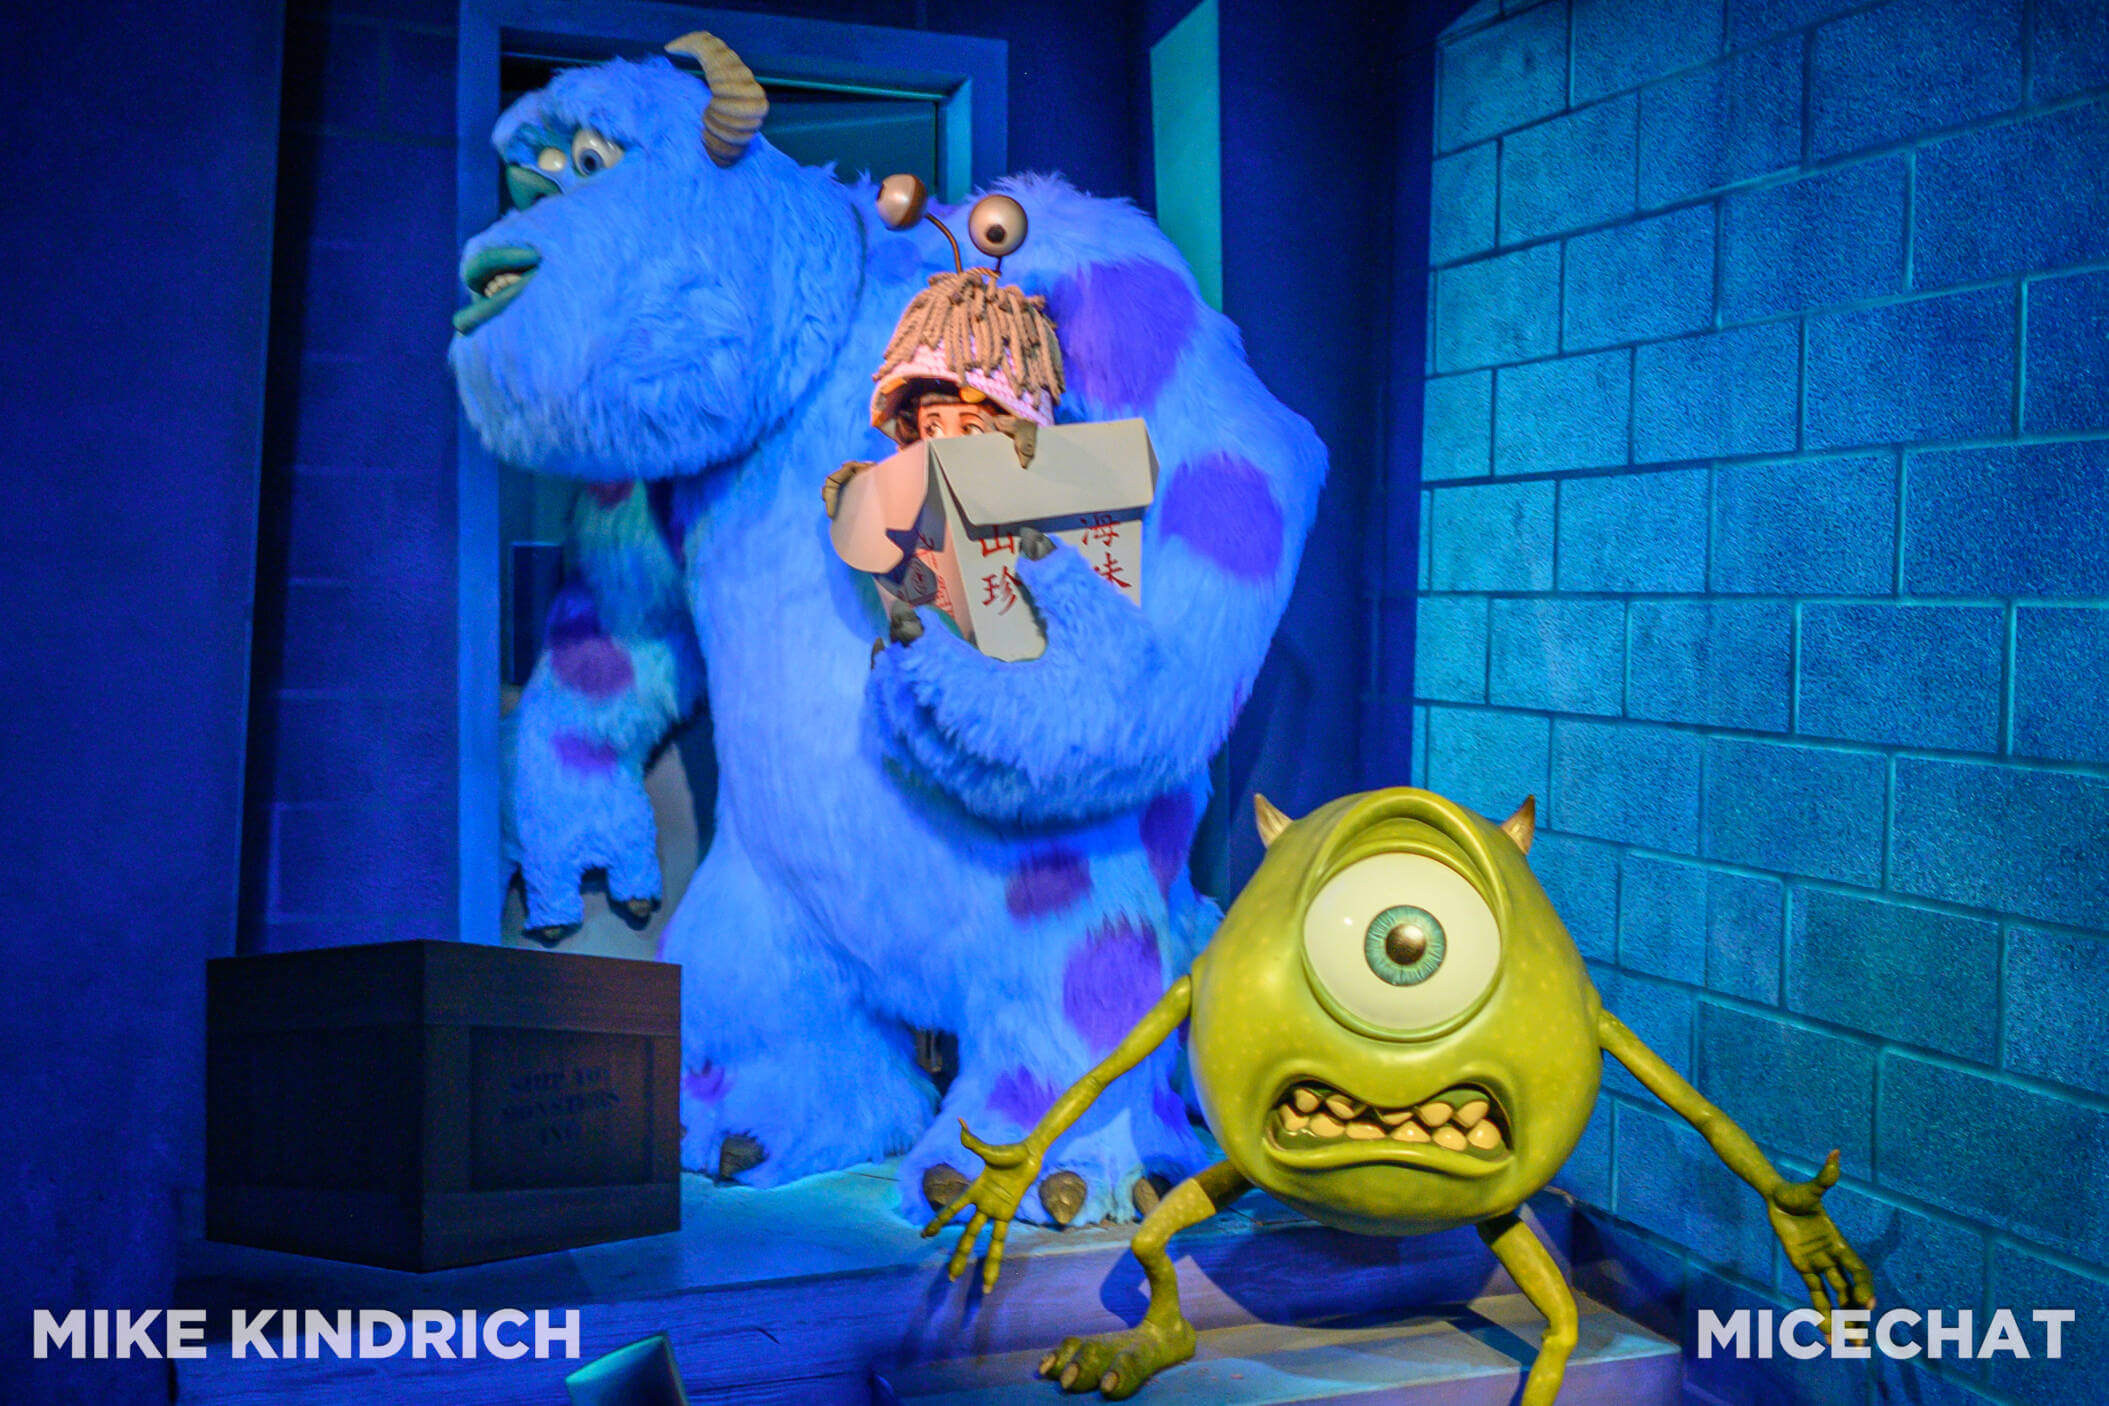 Monsters Inc. Mike and Sulley to the Rescue! at Disney Character